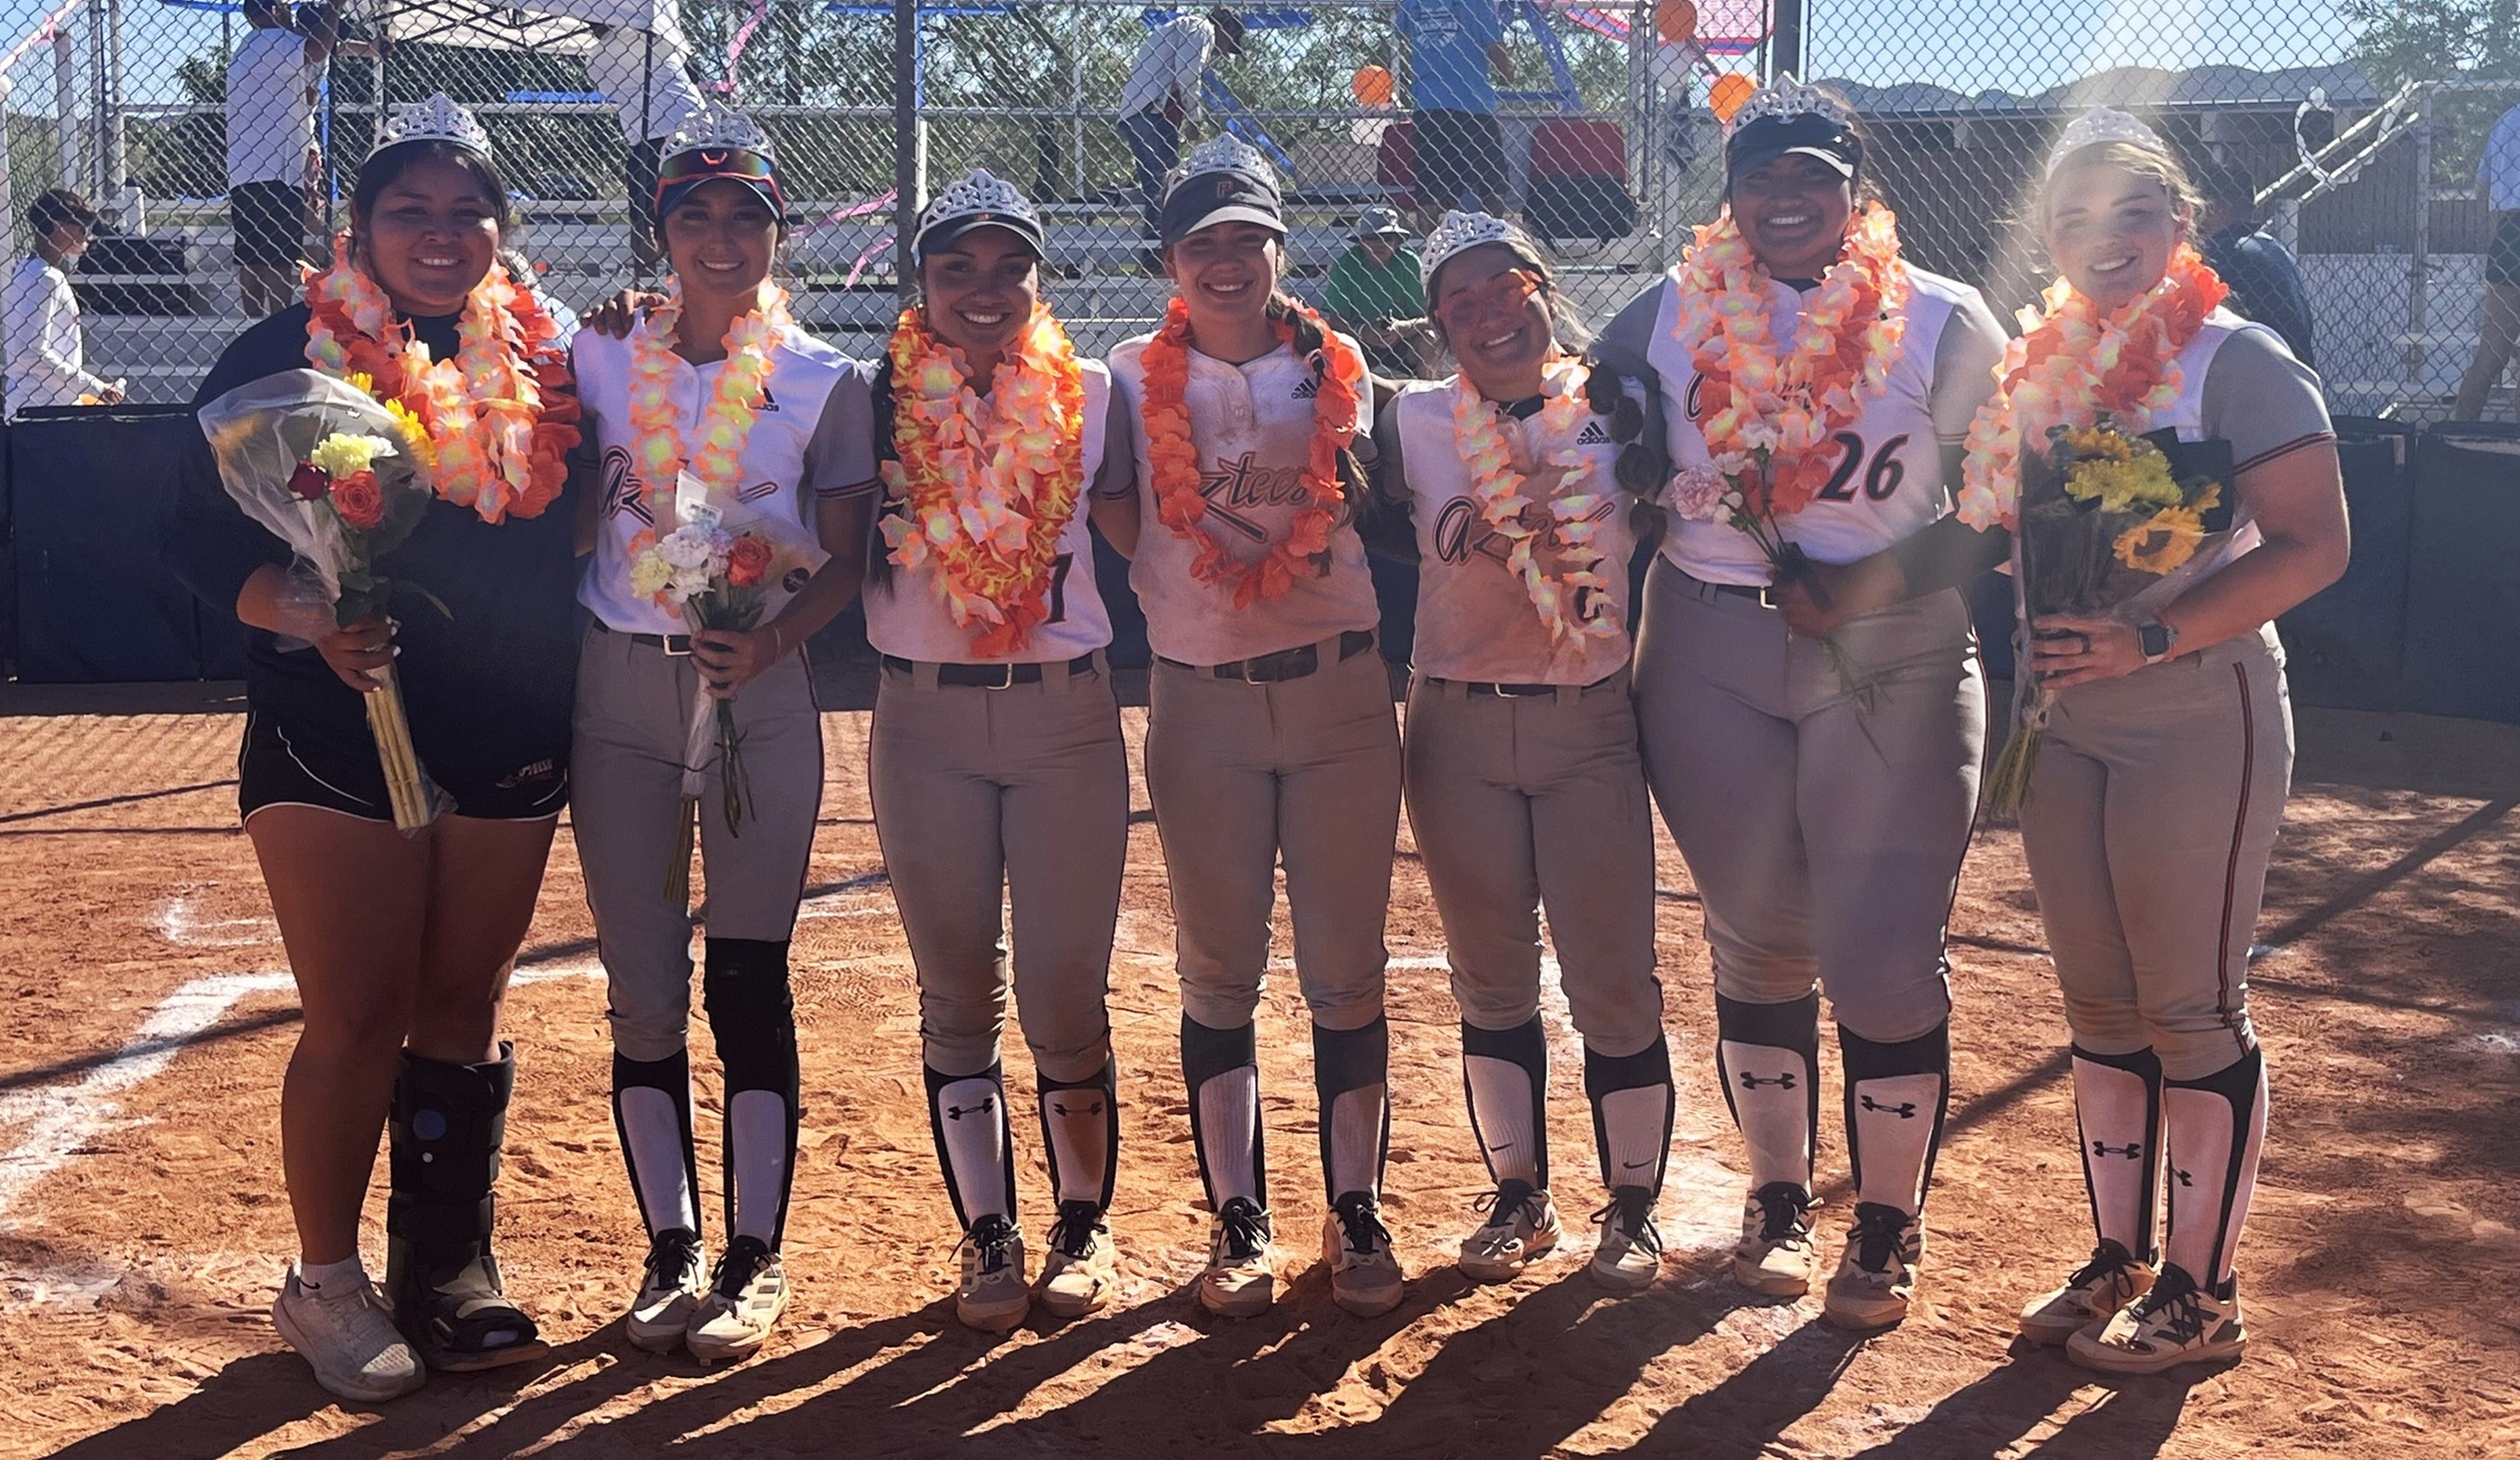 The Aztecs softball snapped a four-game skid after sweeping Yavapai College 13-4 and 4-3 on Tuesday at Aztec Field. After the games, the seven sophomores were recognized. (Left to right): Alexis Tsosie-Hood, Jasmine Majonica (Flowing Wells HS), Mina Chacon (Tucson Magnet HS), Camila Zepeda (Tucson Magnet HS), Gabriella Salazar (Marana HS), Kayla Miranda (Tucson Magnet HS) and Mallory Zylinski-Wrobel (Sahuarita HS)/Photo by Ray Suarez